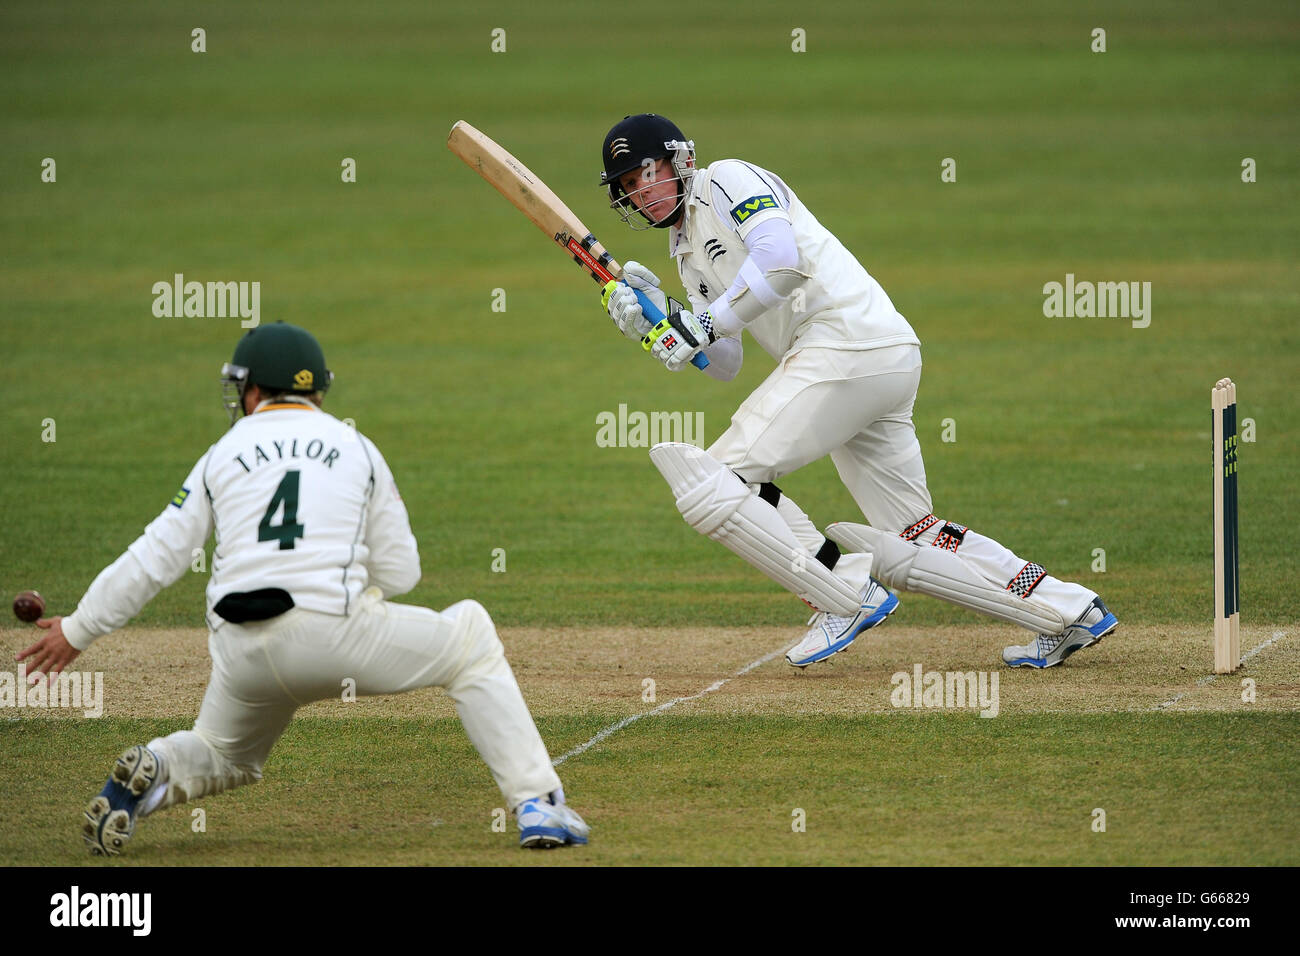 Cricket - LV=County Championship - Divisione uno - giorno uno - Nottinghamshire / Middlesex - Trent Bridge. Sam Robson, Nottinghamshire e James Taylor, Middlesex. Foto Stock